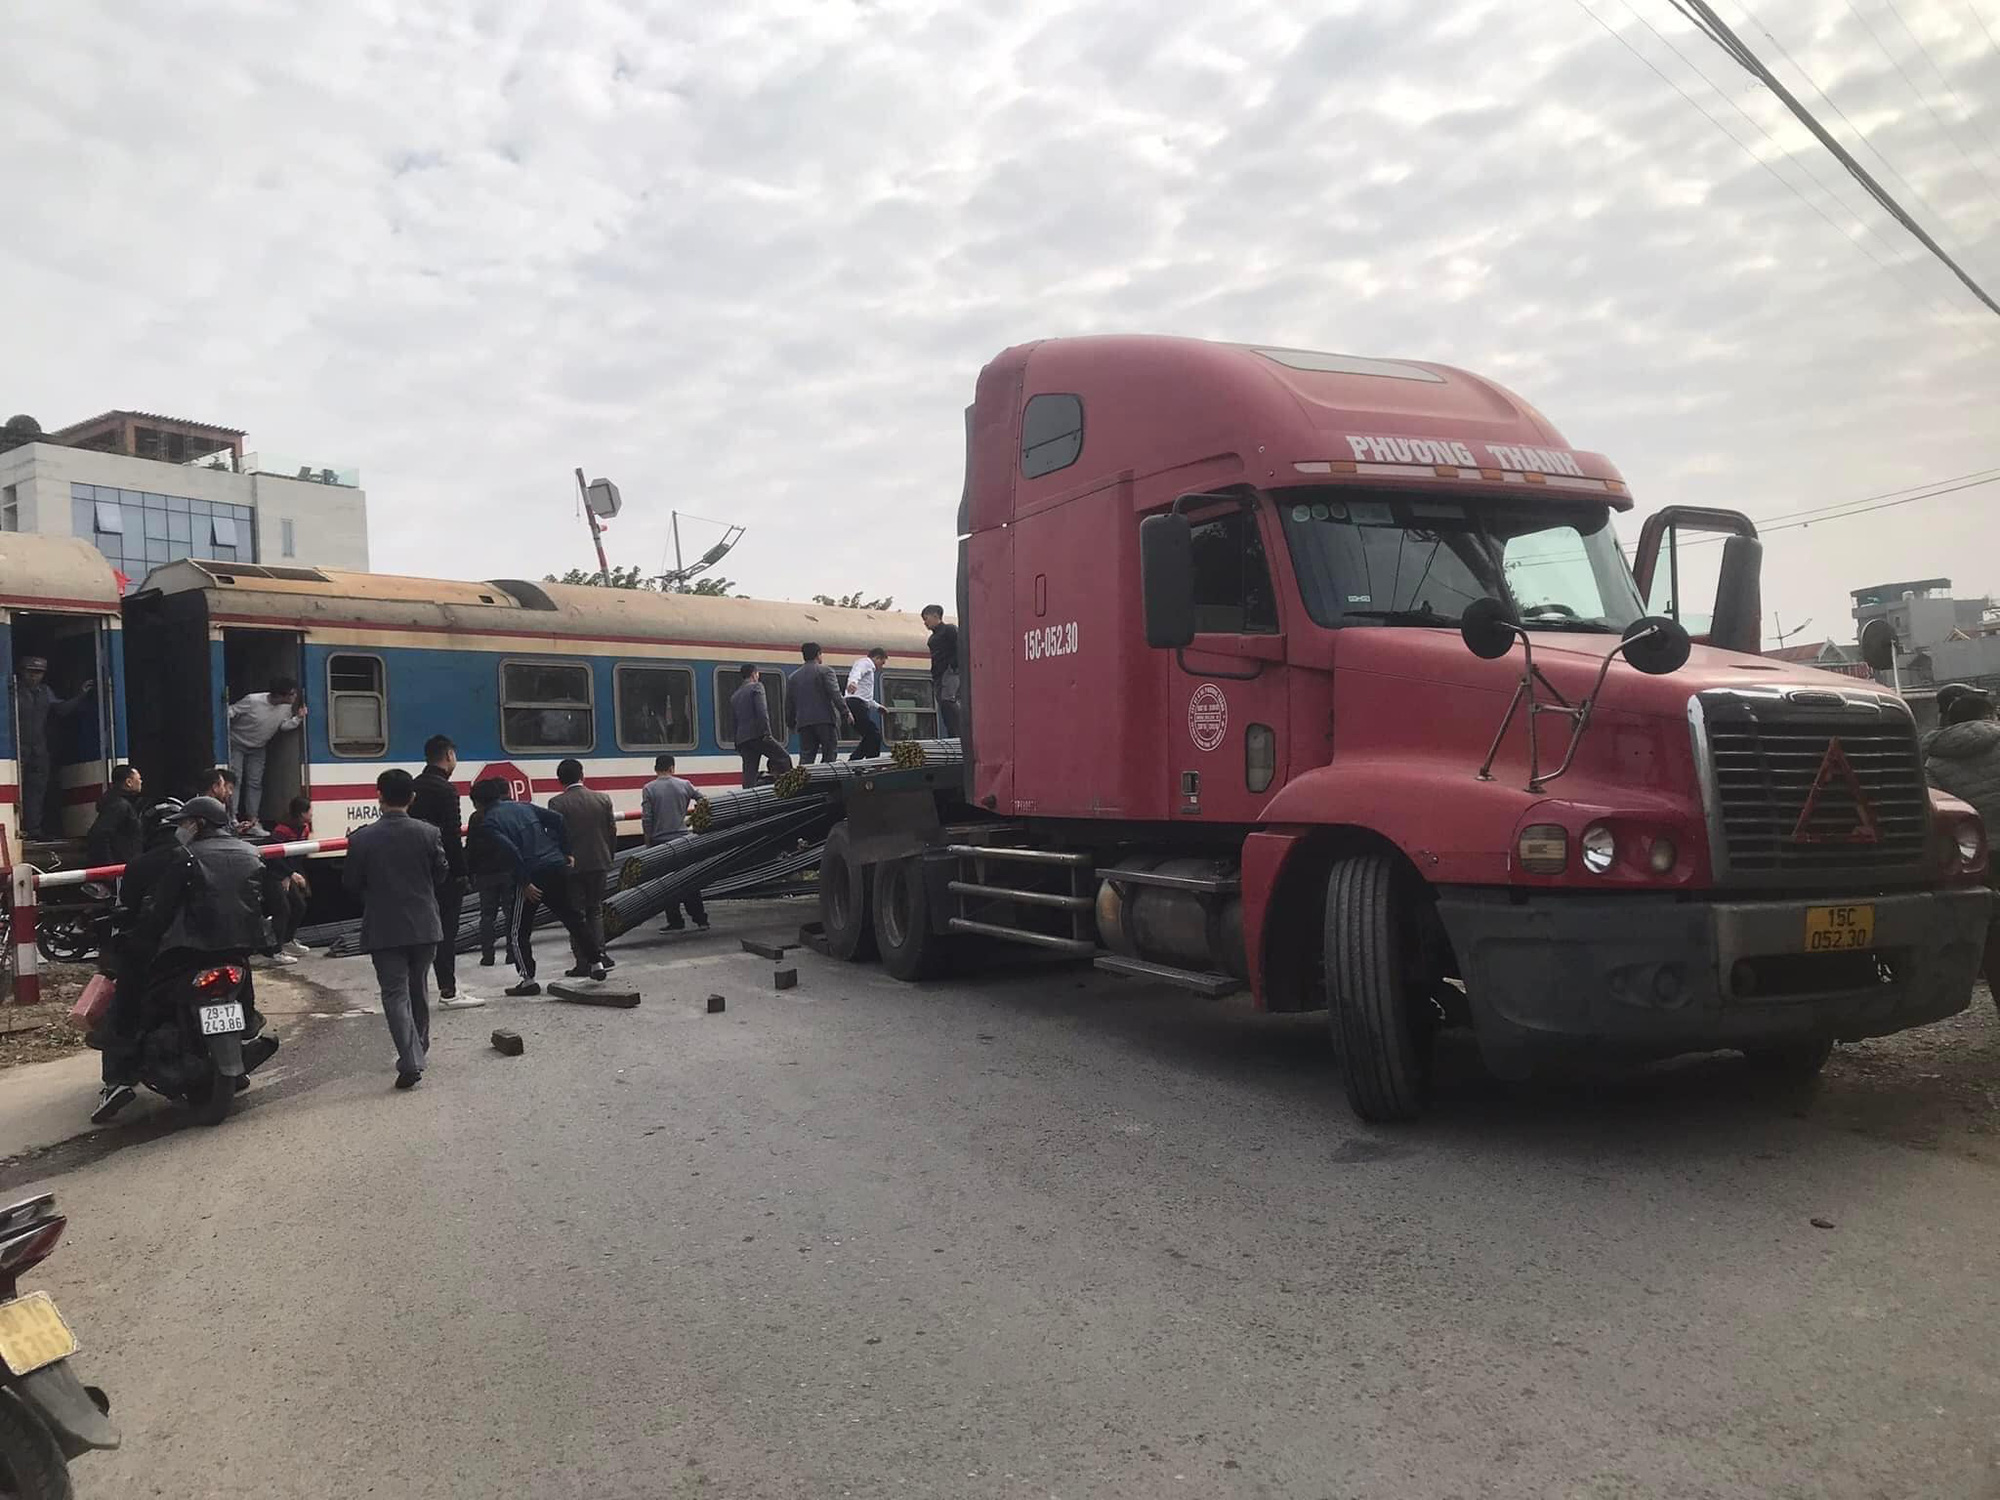 Truck-train collision in Hanoi injures 1, interrupts railway route for 2.5 hours